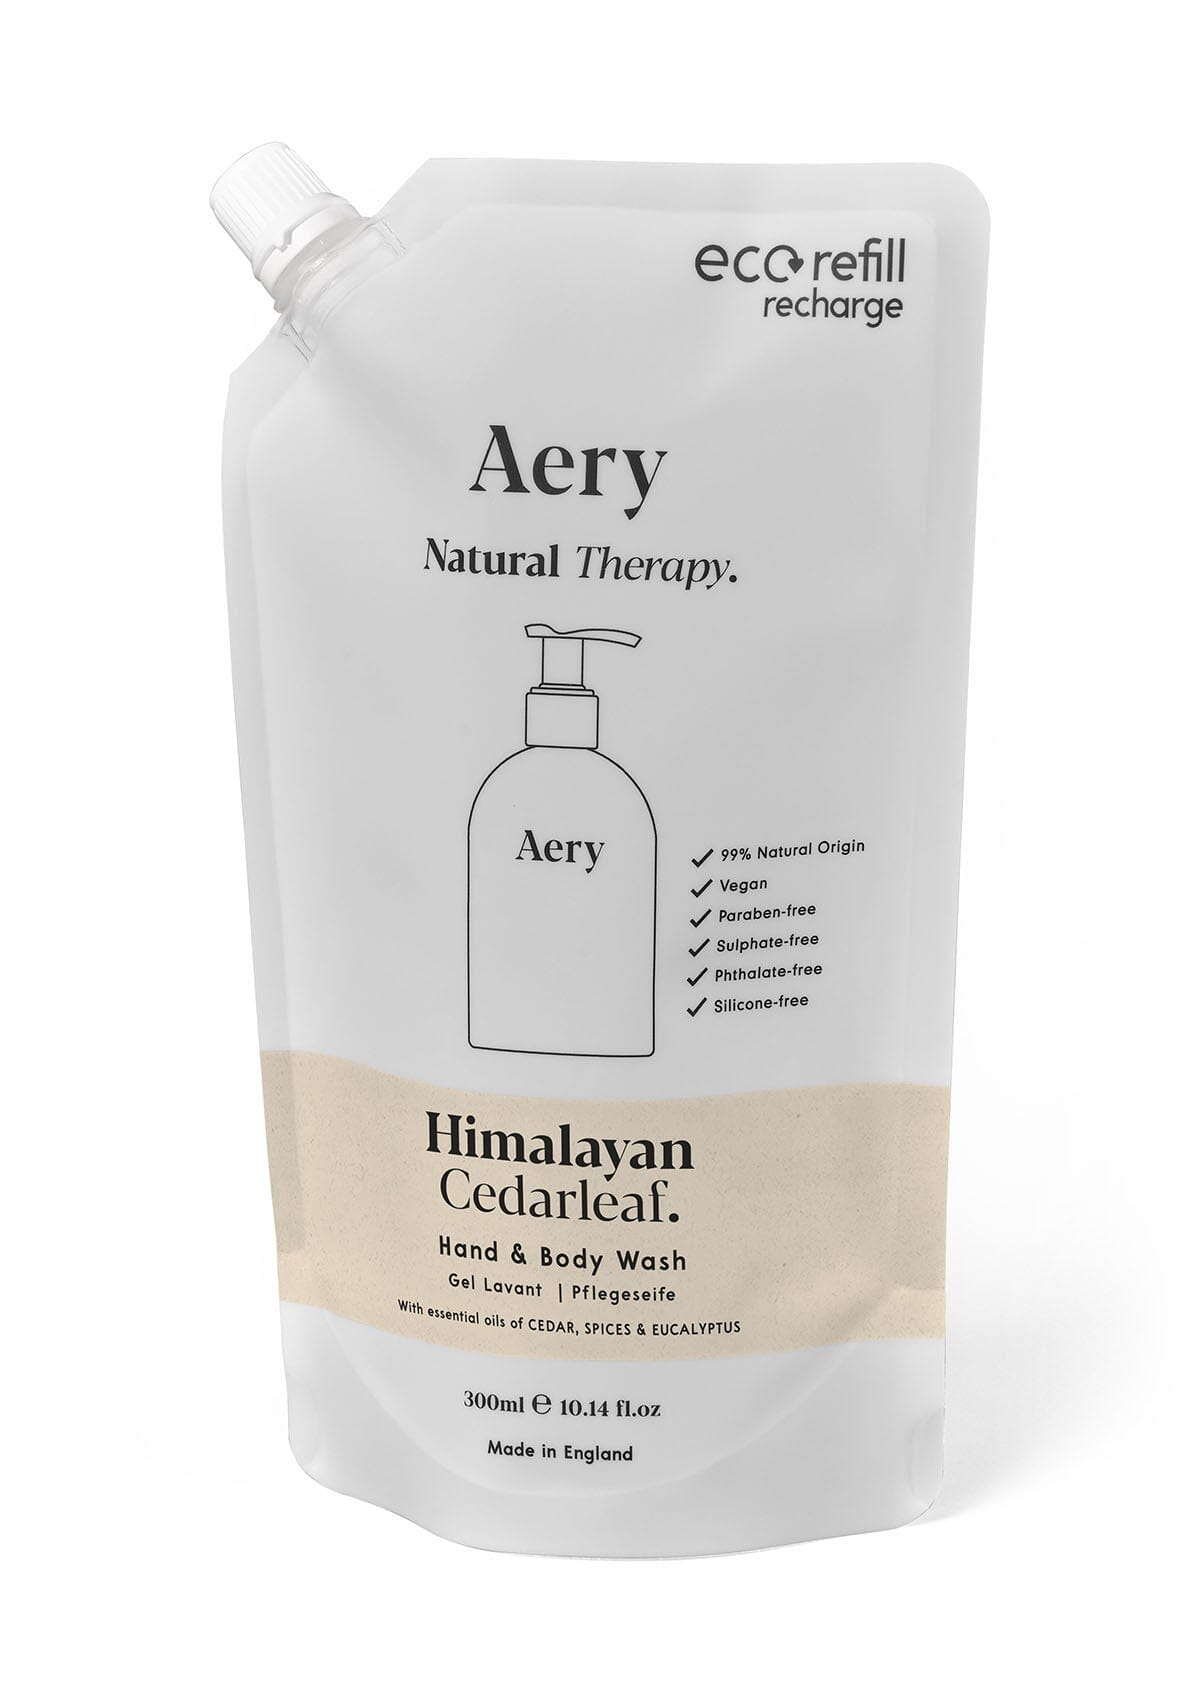 Cream Himalayan Cedarleaf hand and body refill pouch by aery displayed on white background 